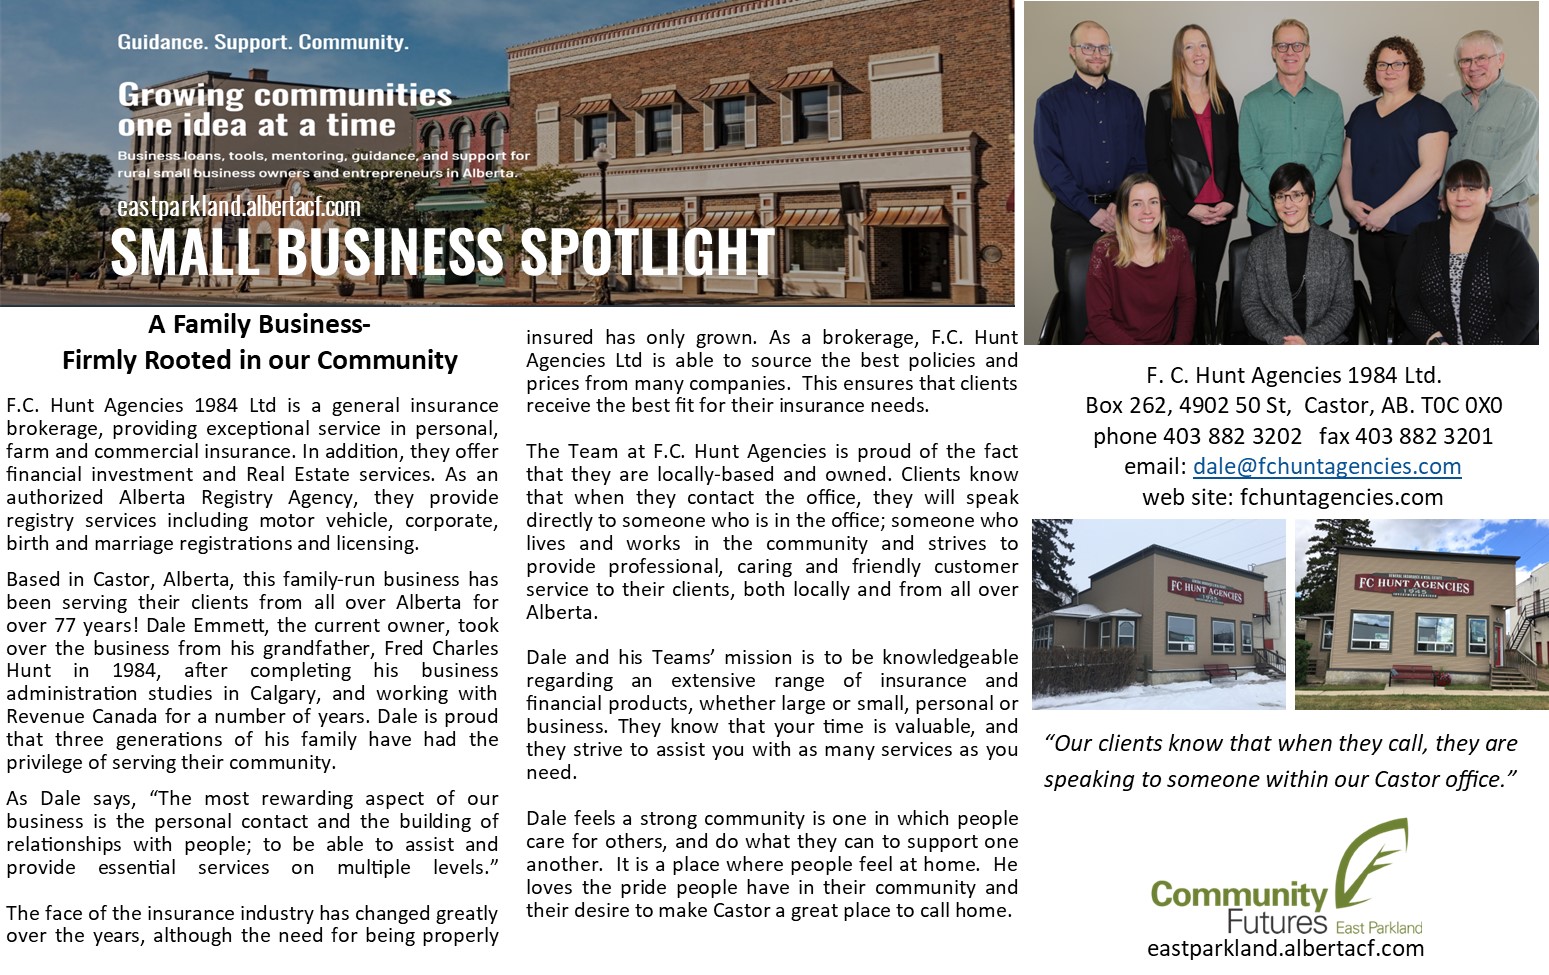 A Family Business- Firmly Rooted in our Community